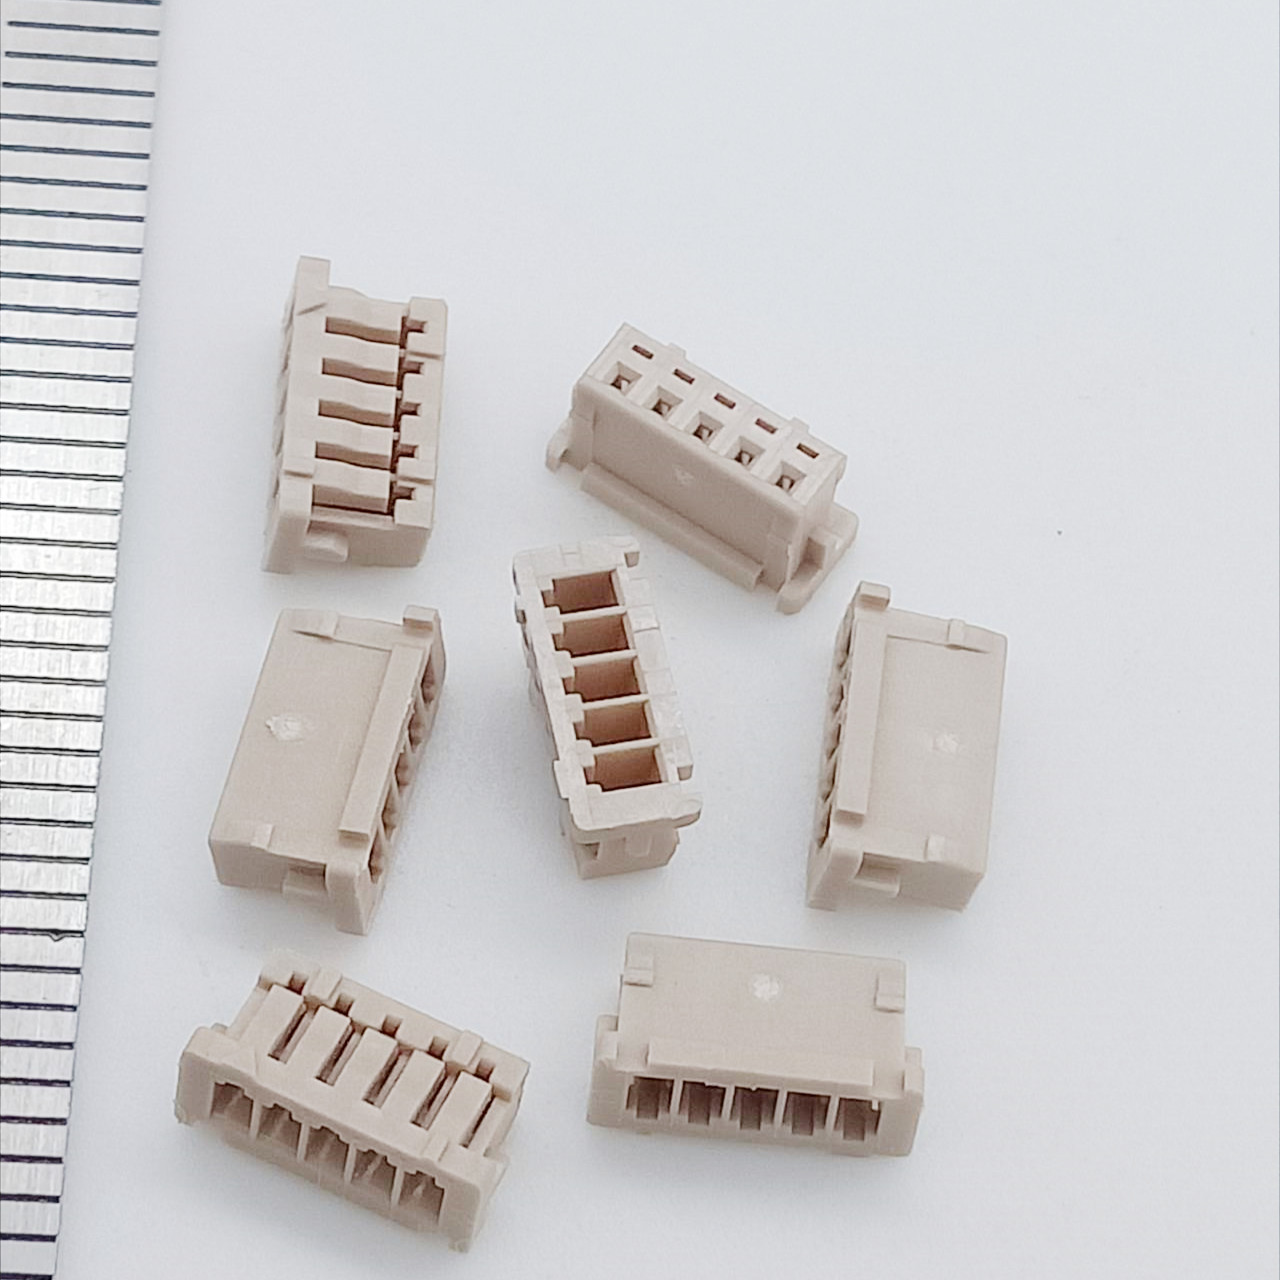 DF13-5S-1.25C is a versatile 5-pin connector commonly used in electronics. With a 1.25mm pitch, it provides reliable and compact connections for various applications, ensuring seamless data and power transmission. 